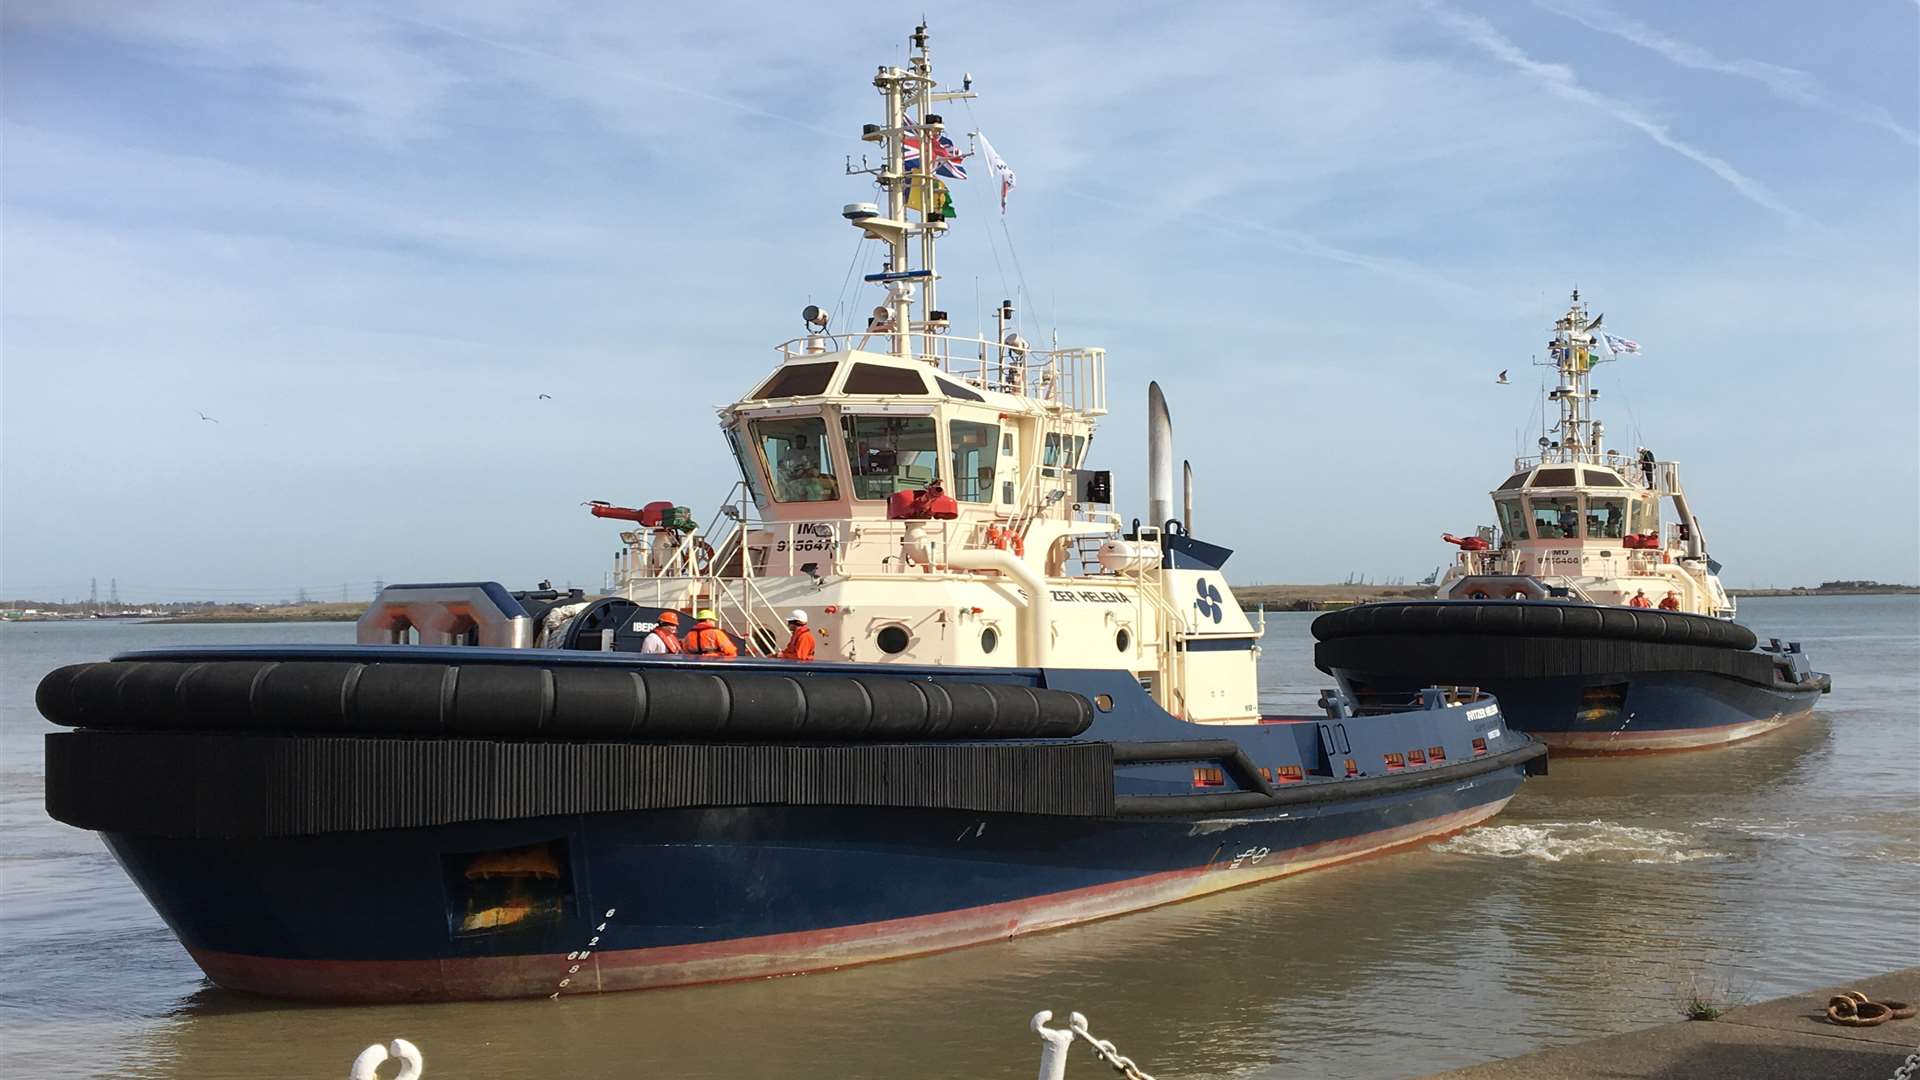 Tugs Svitzer Monarch and Svitzer Ganges now based in Sheerness.